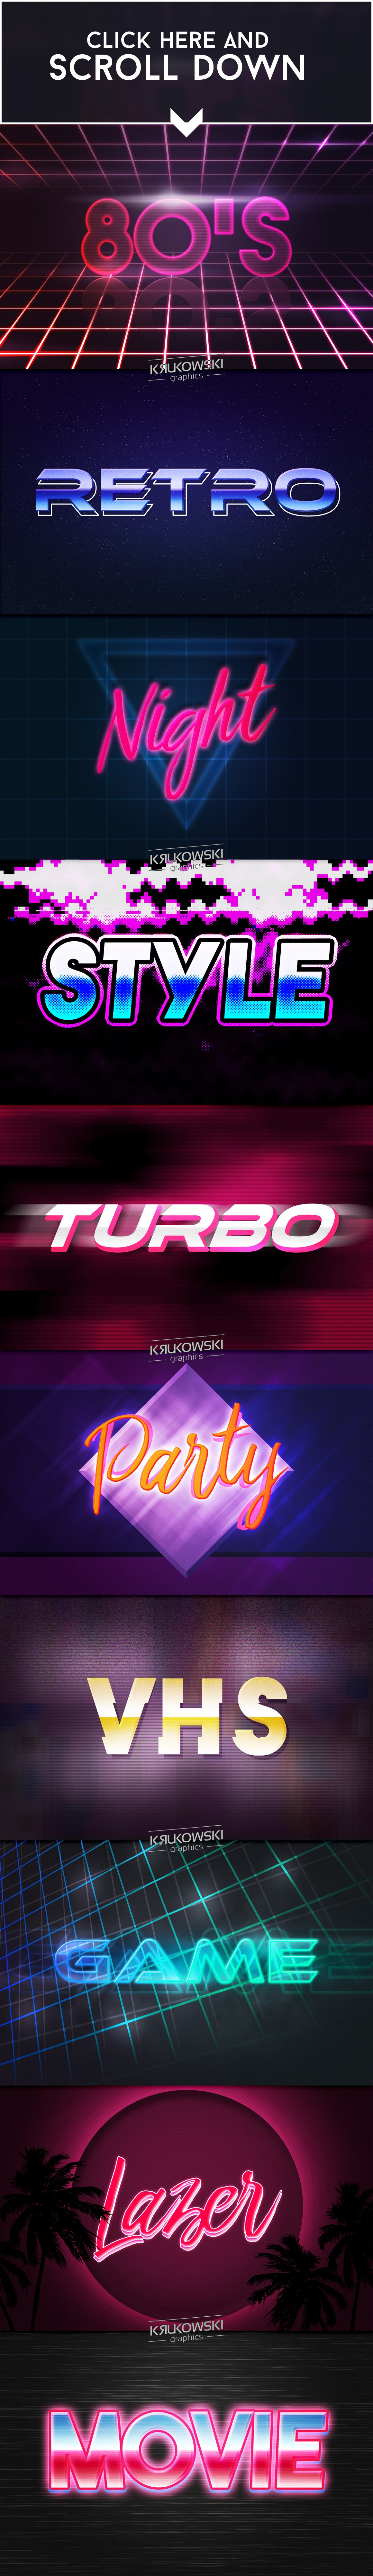 80's Retro Text Effect Mockuppreview image.